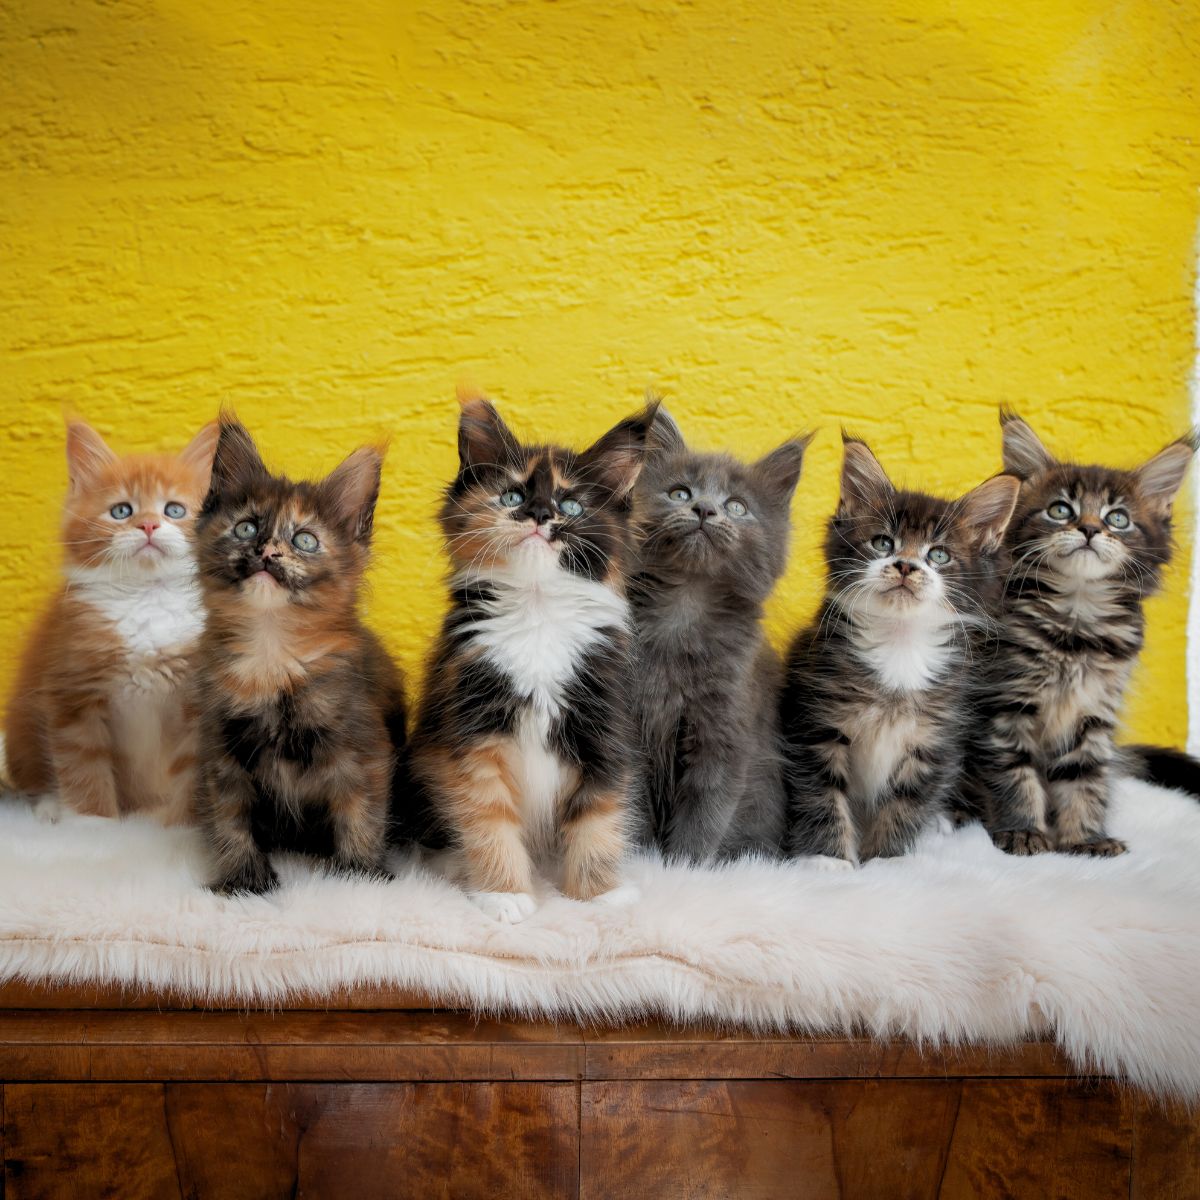 six kittens on a white fluffy cover